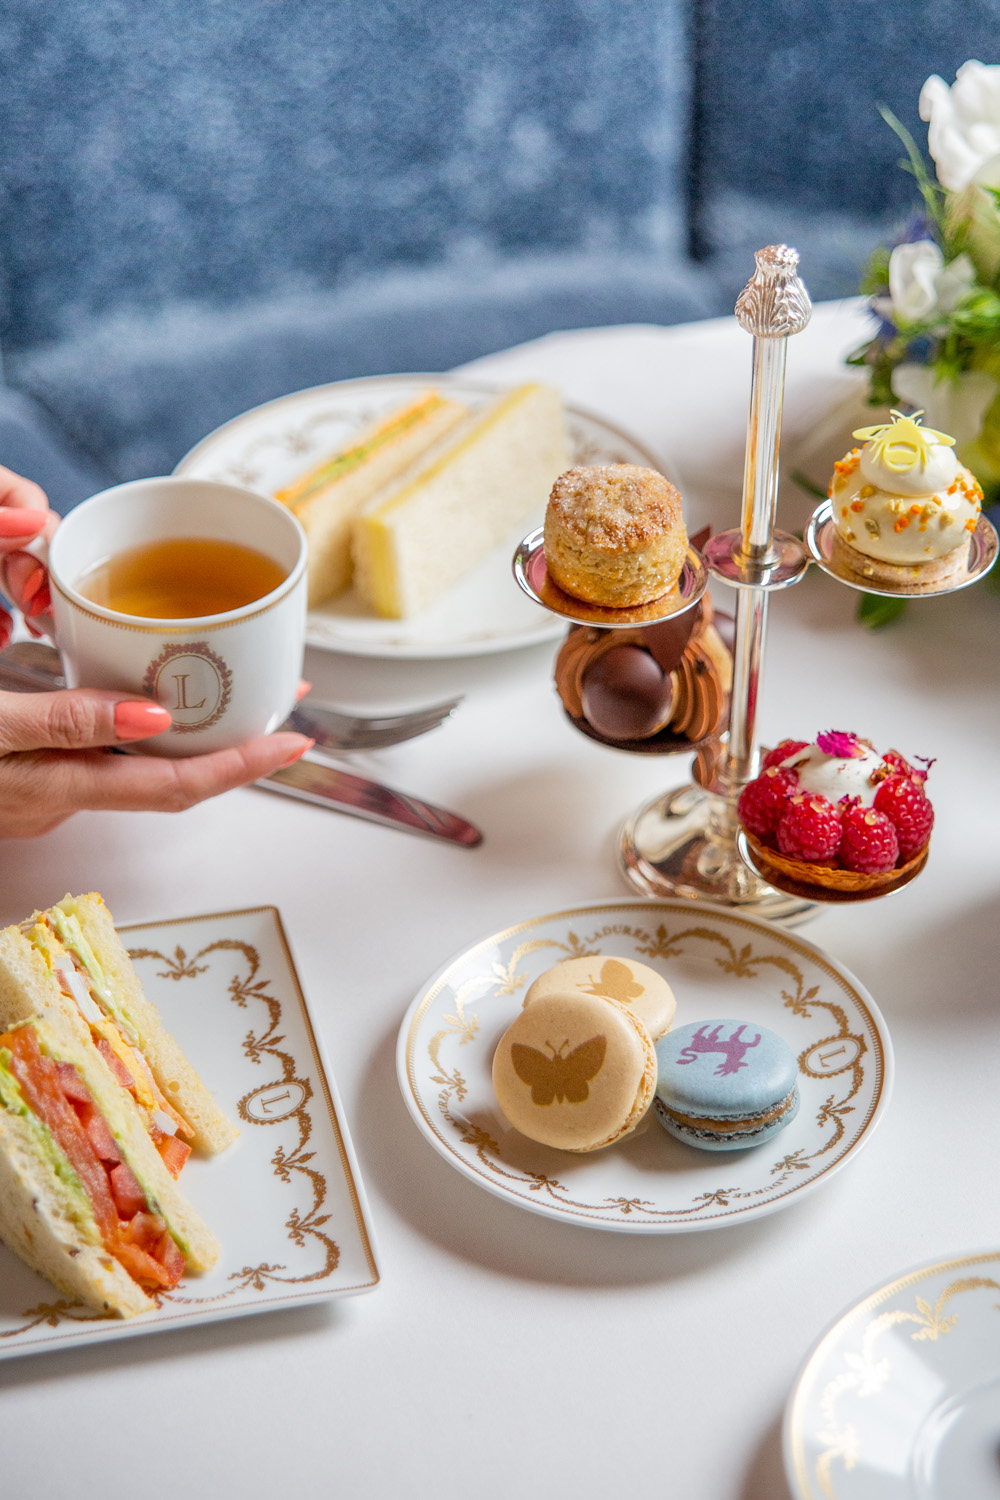 A Bridgerton Themed Afternoon Tea Is Coming To London